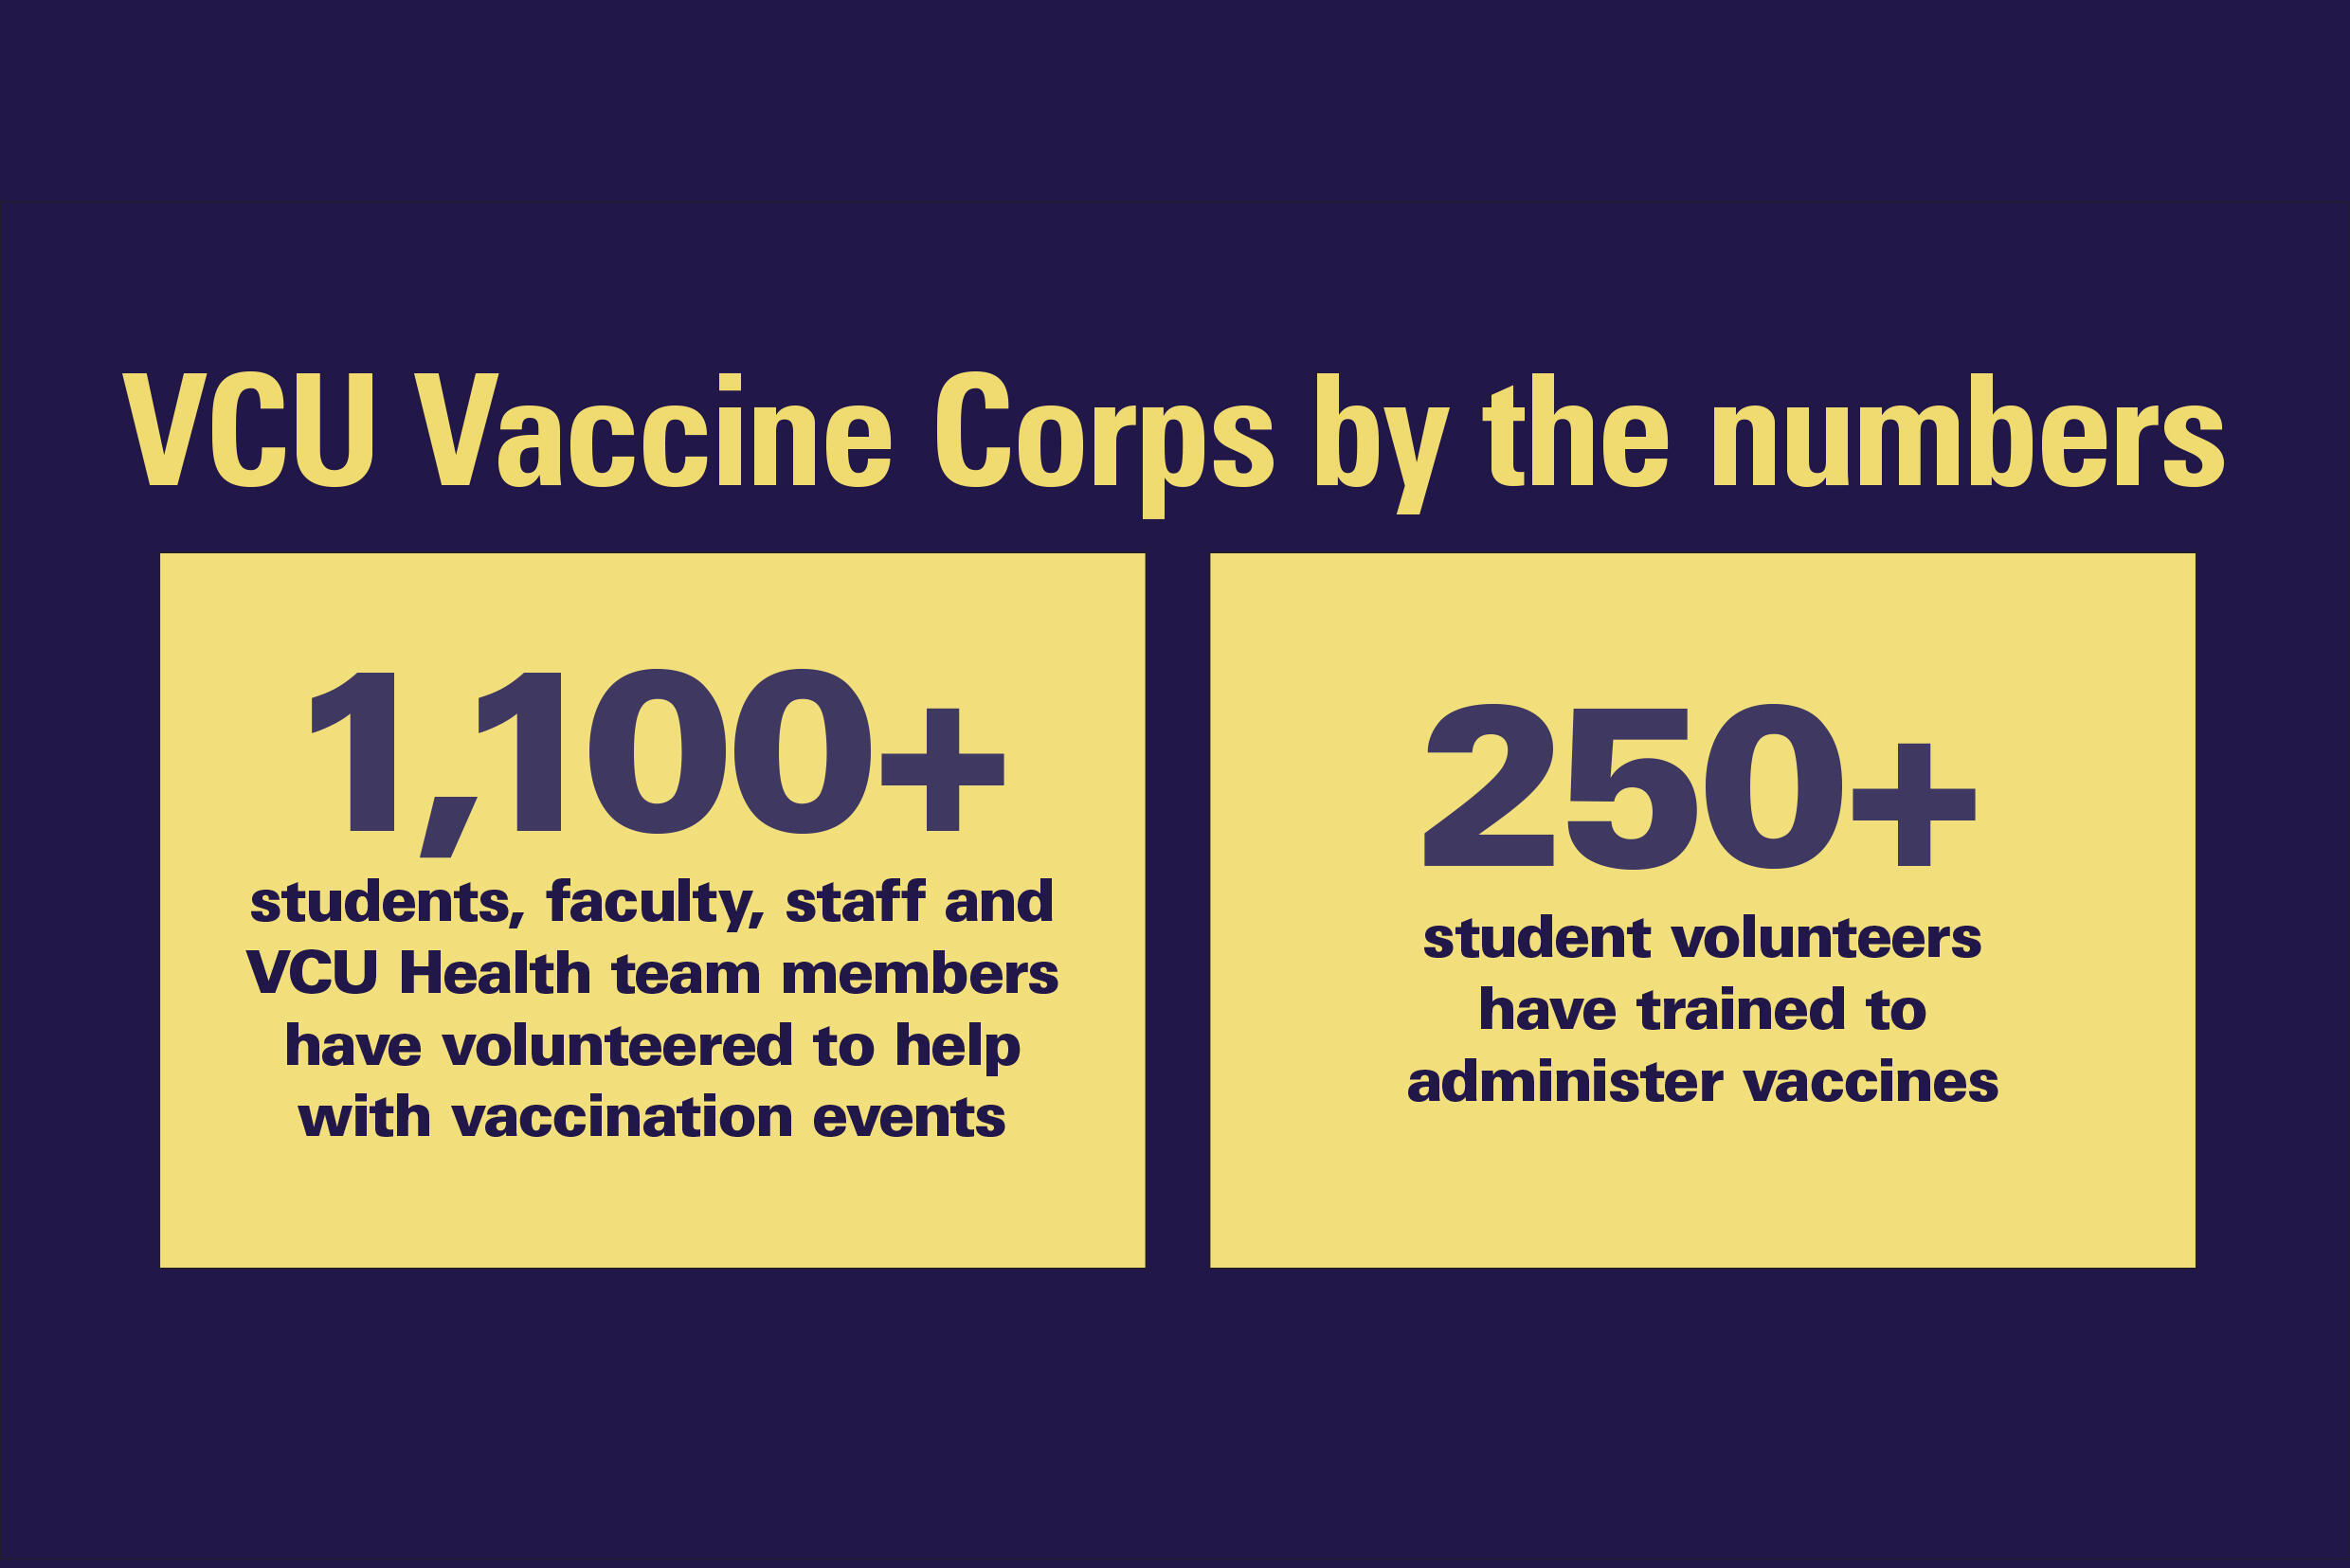 "VCU Vaccine Corps by the Numbers. "1,100+ students, faculty, staff and VCU Health team members have volunteered to help with vaccination events. 250+ student volunteers have trained to adminster vaccines."